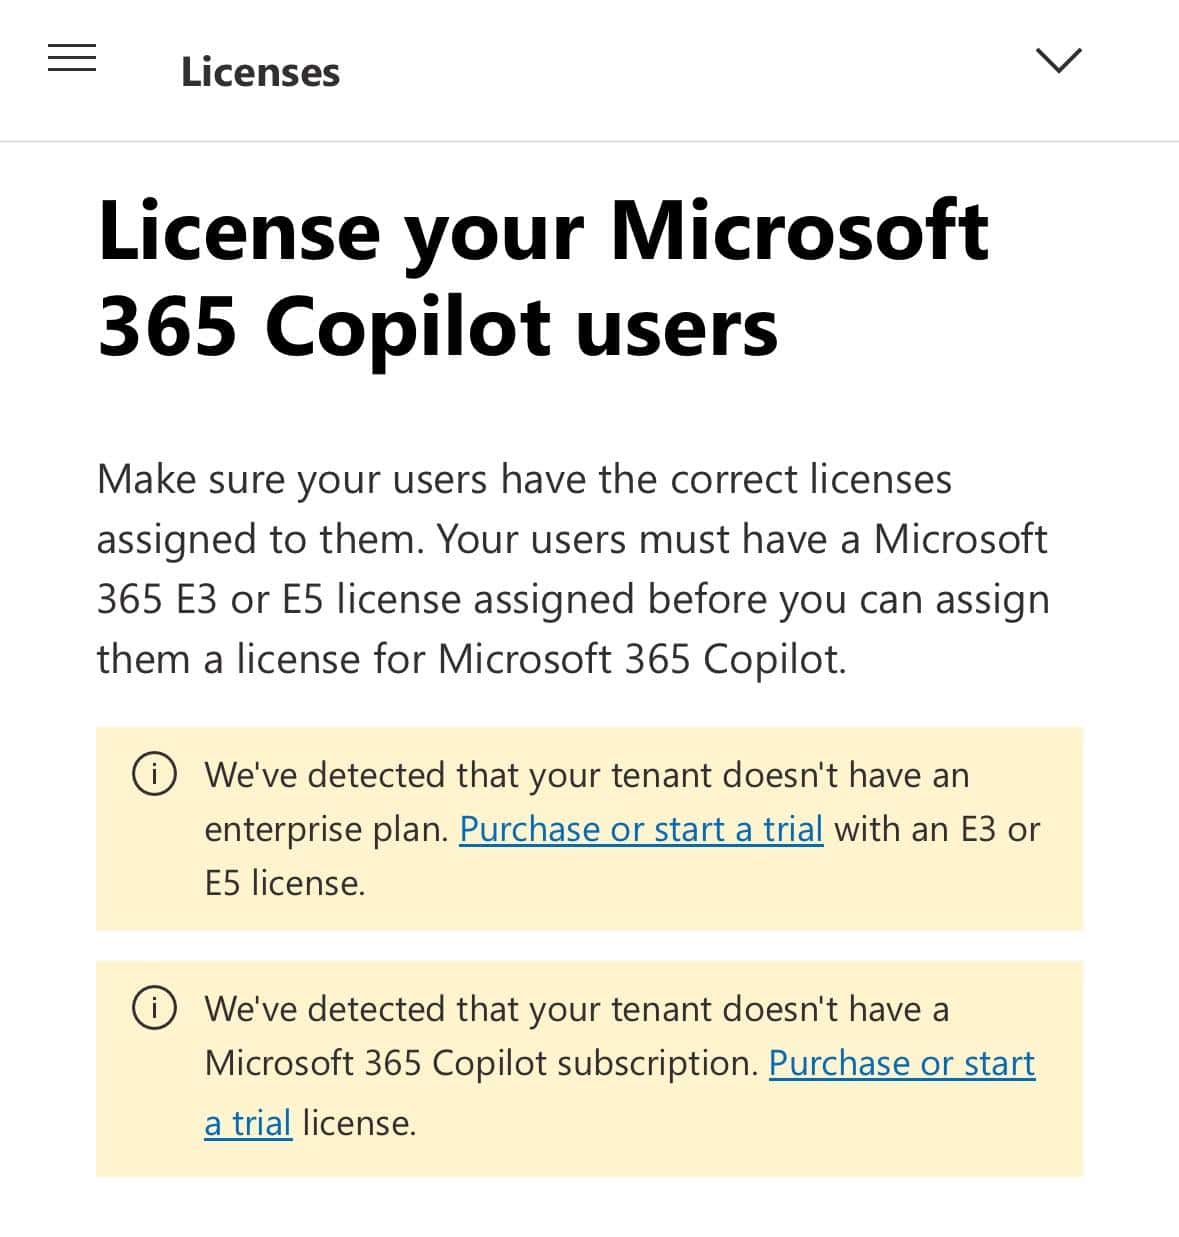 Microsoft Copilot license requirements and support